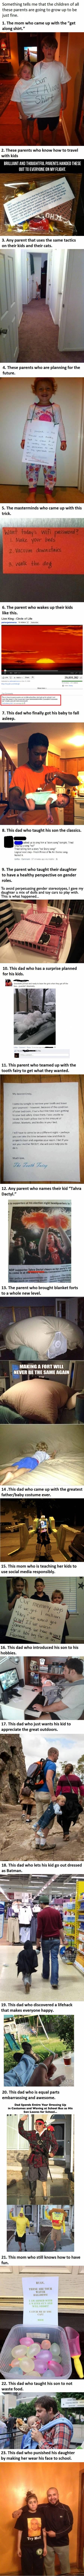 23 People That Are Winning at Parenting... -   Misc